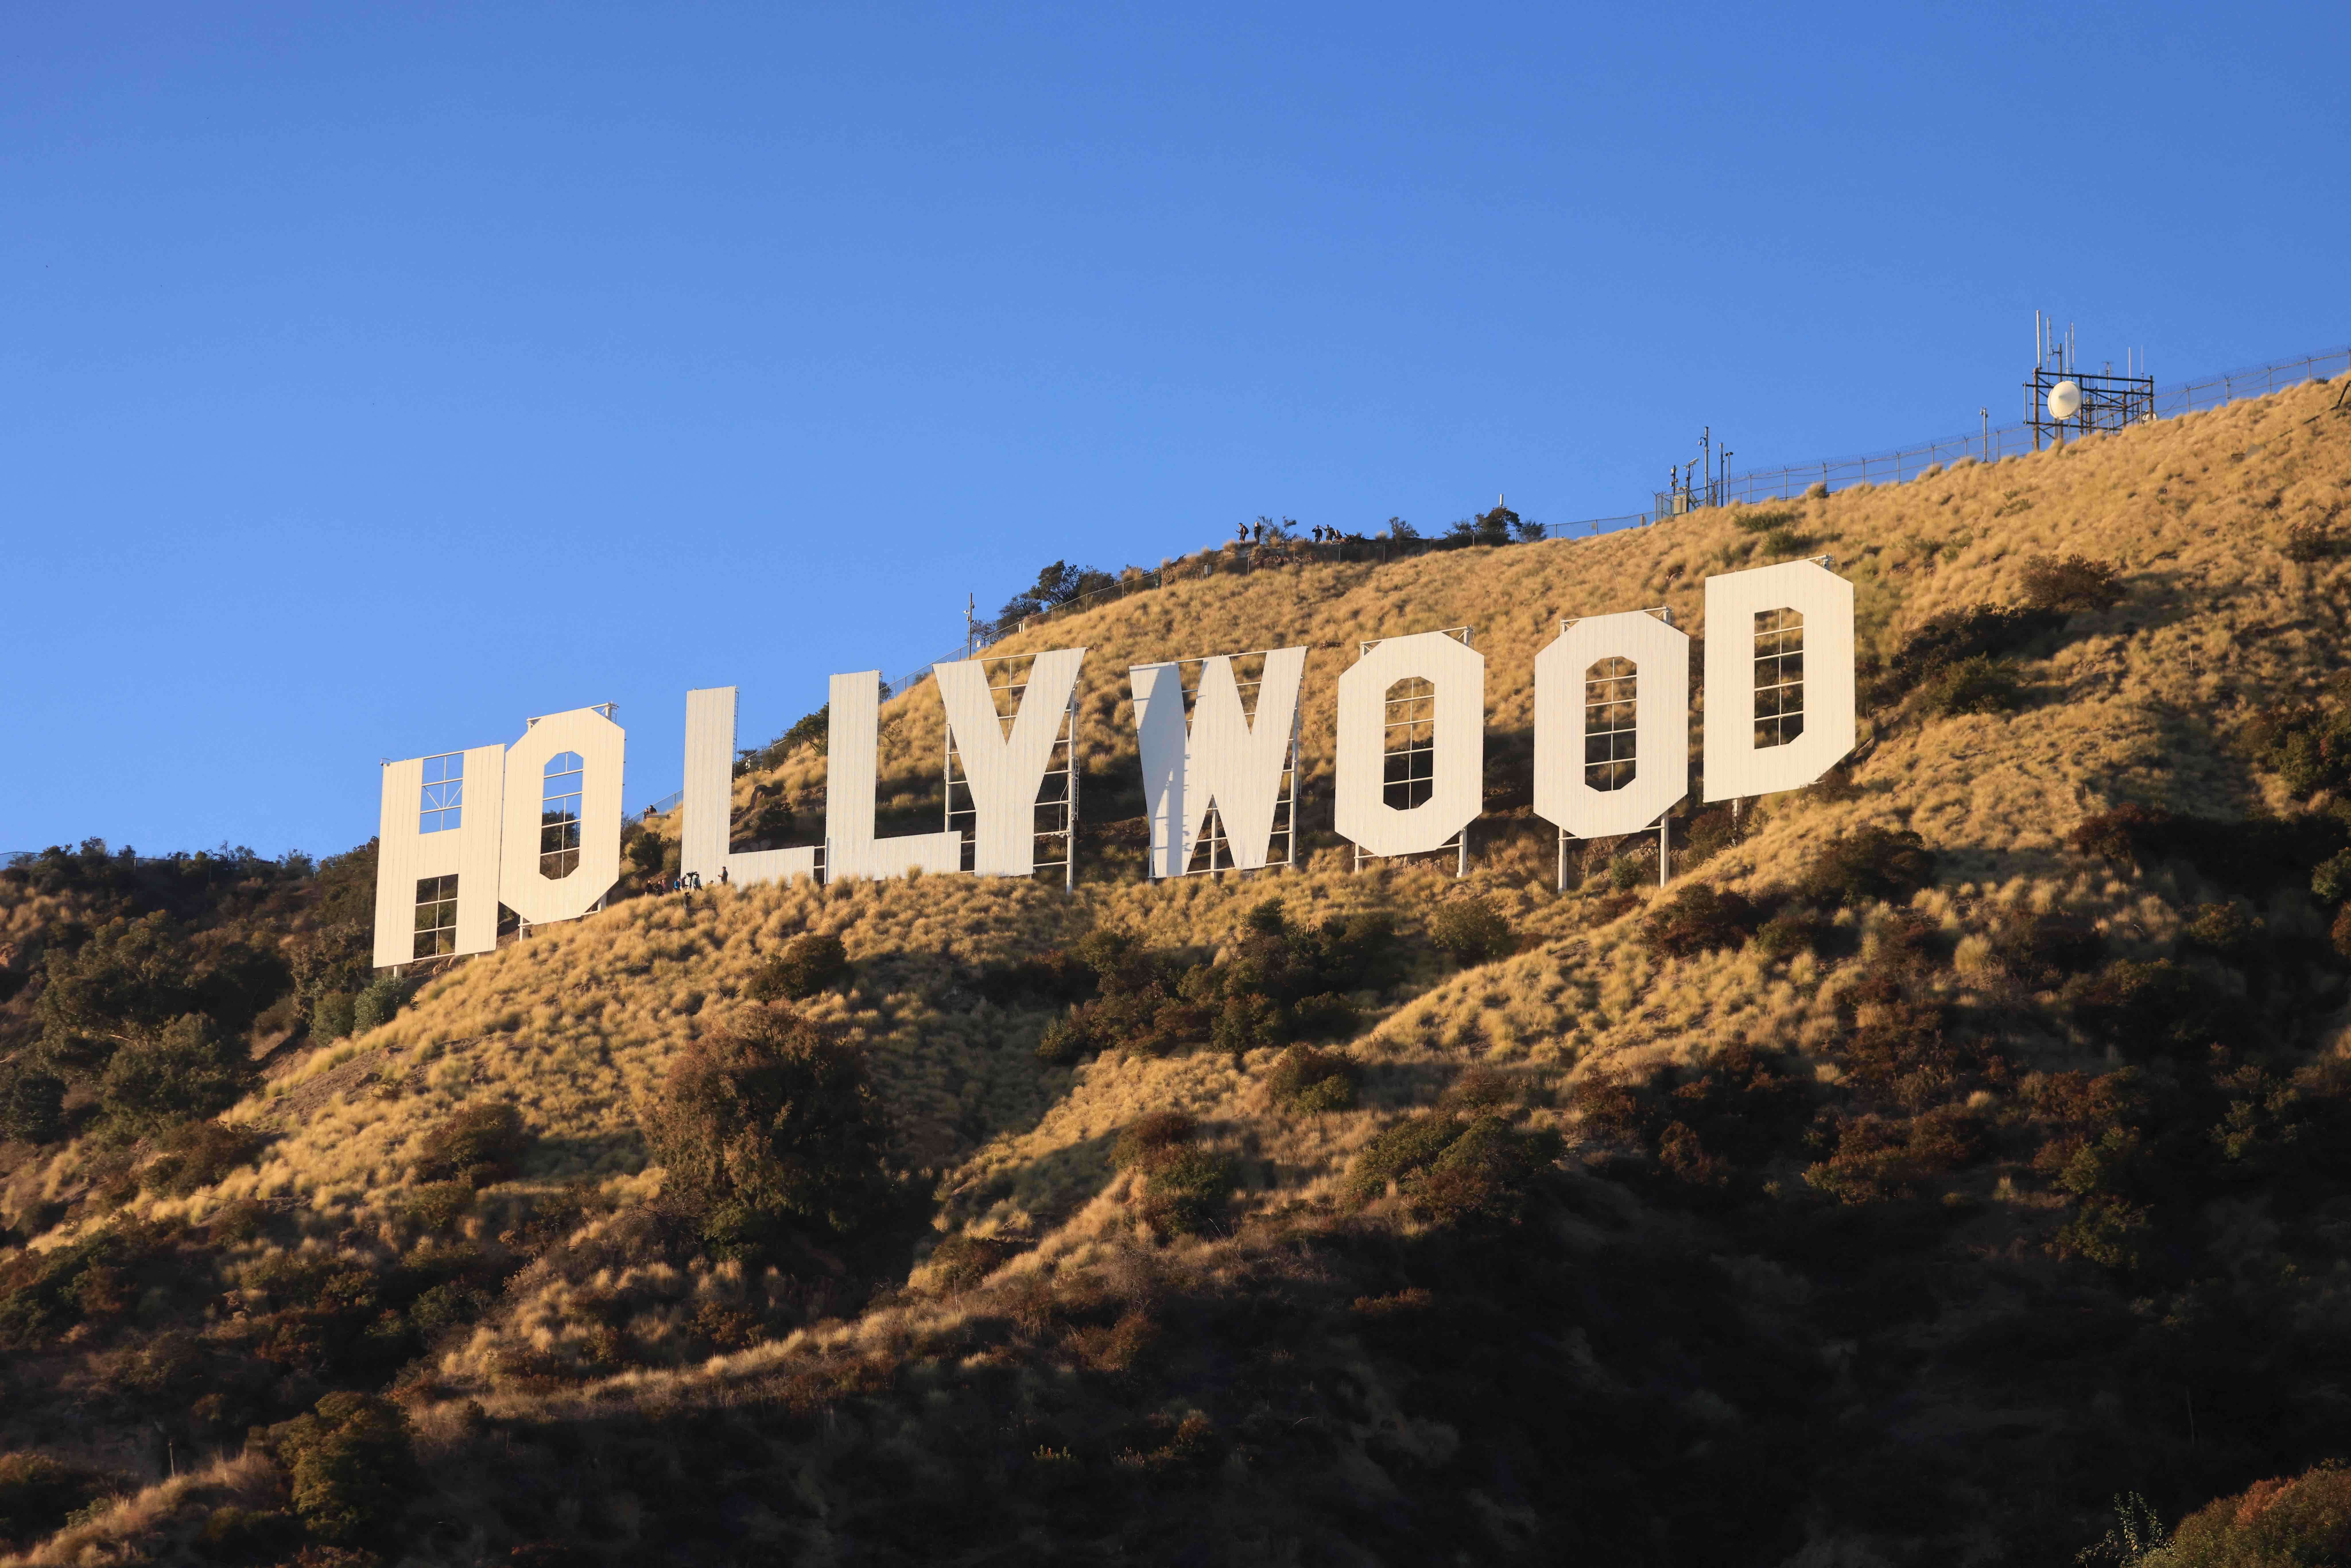 The famed Hollywood sign marks the 100th anniversary of the first time it was lit.